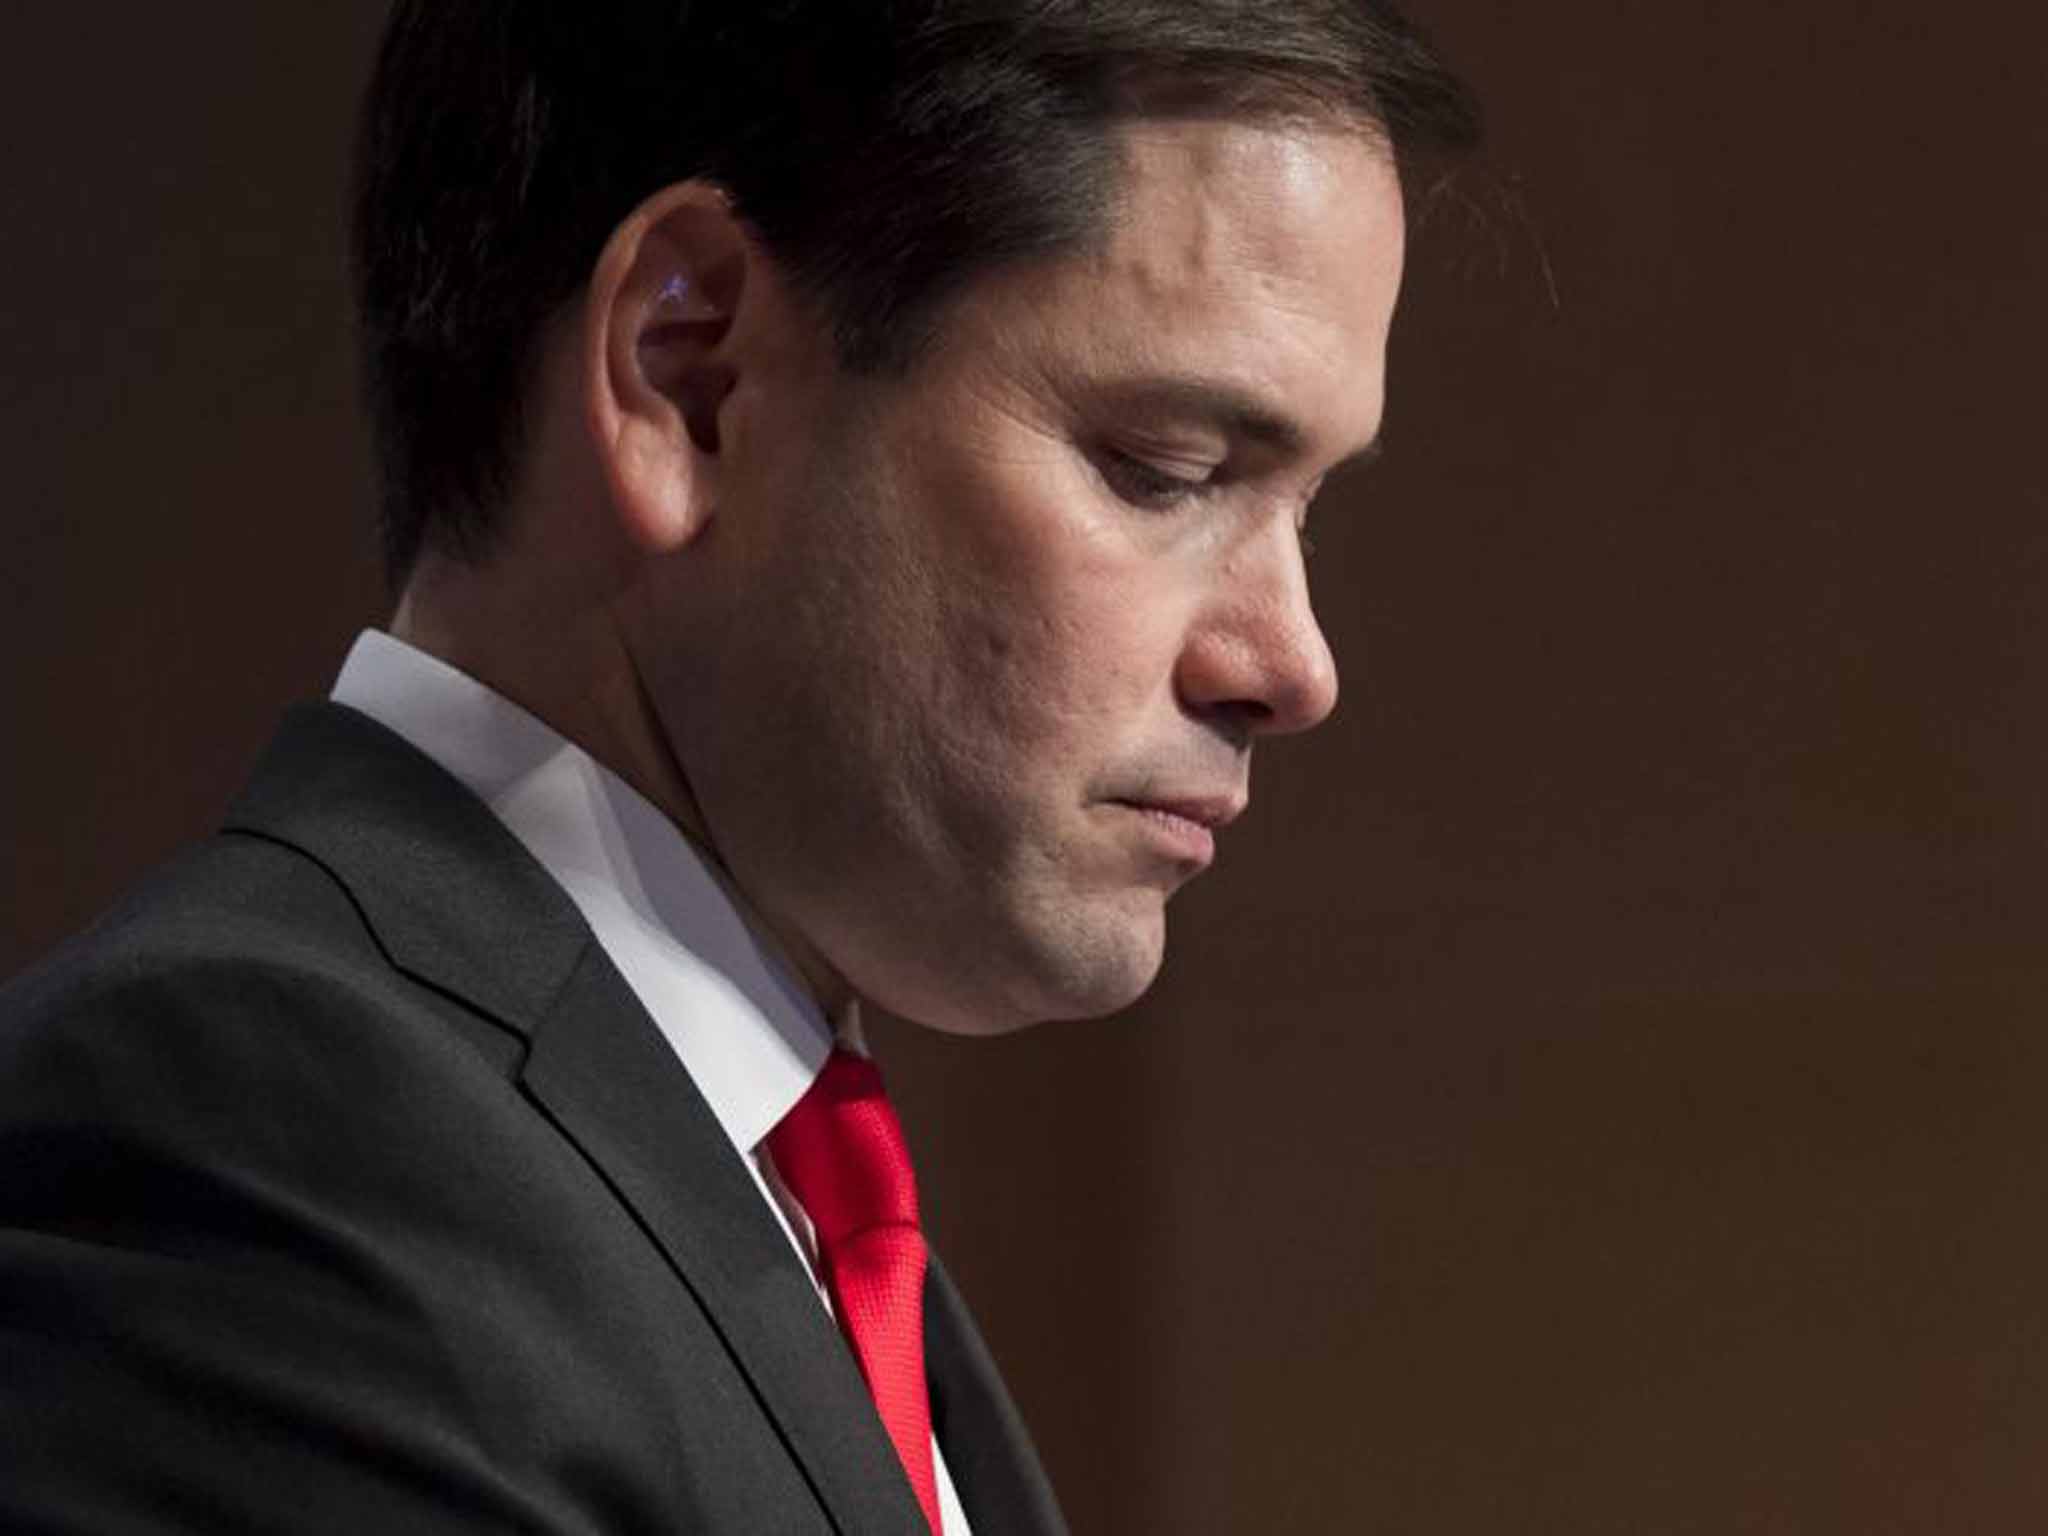 Marco Rubio thinks sex workers are victims that need to escape, but proposes to confiscate their cash